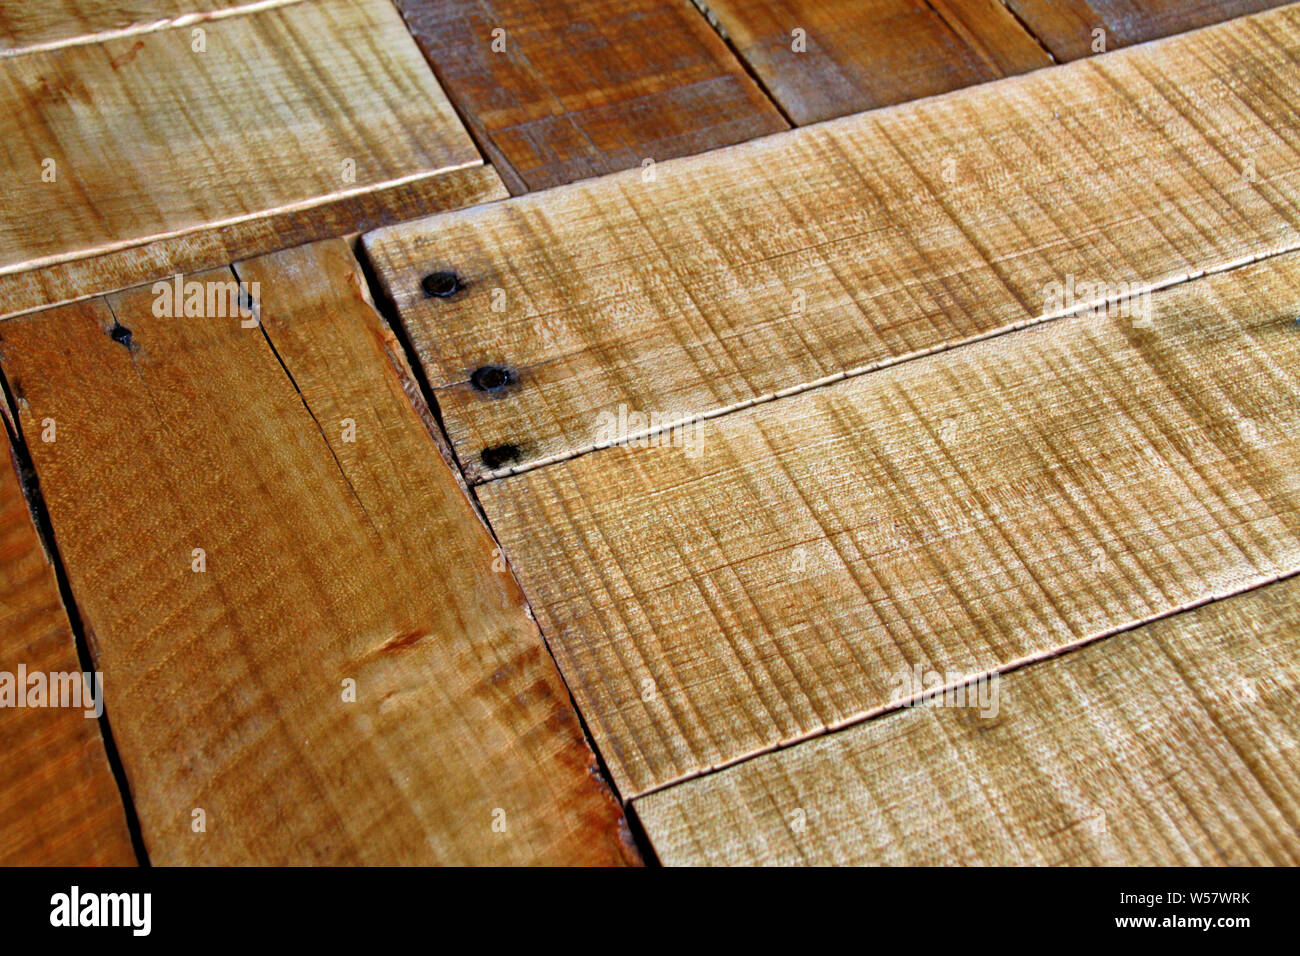 Part of a rough and rugged wood table top viewed at an angle. Stock Photo